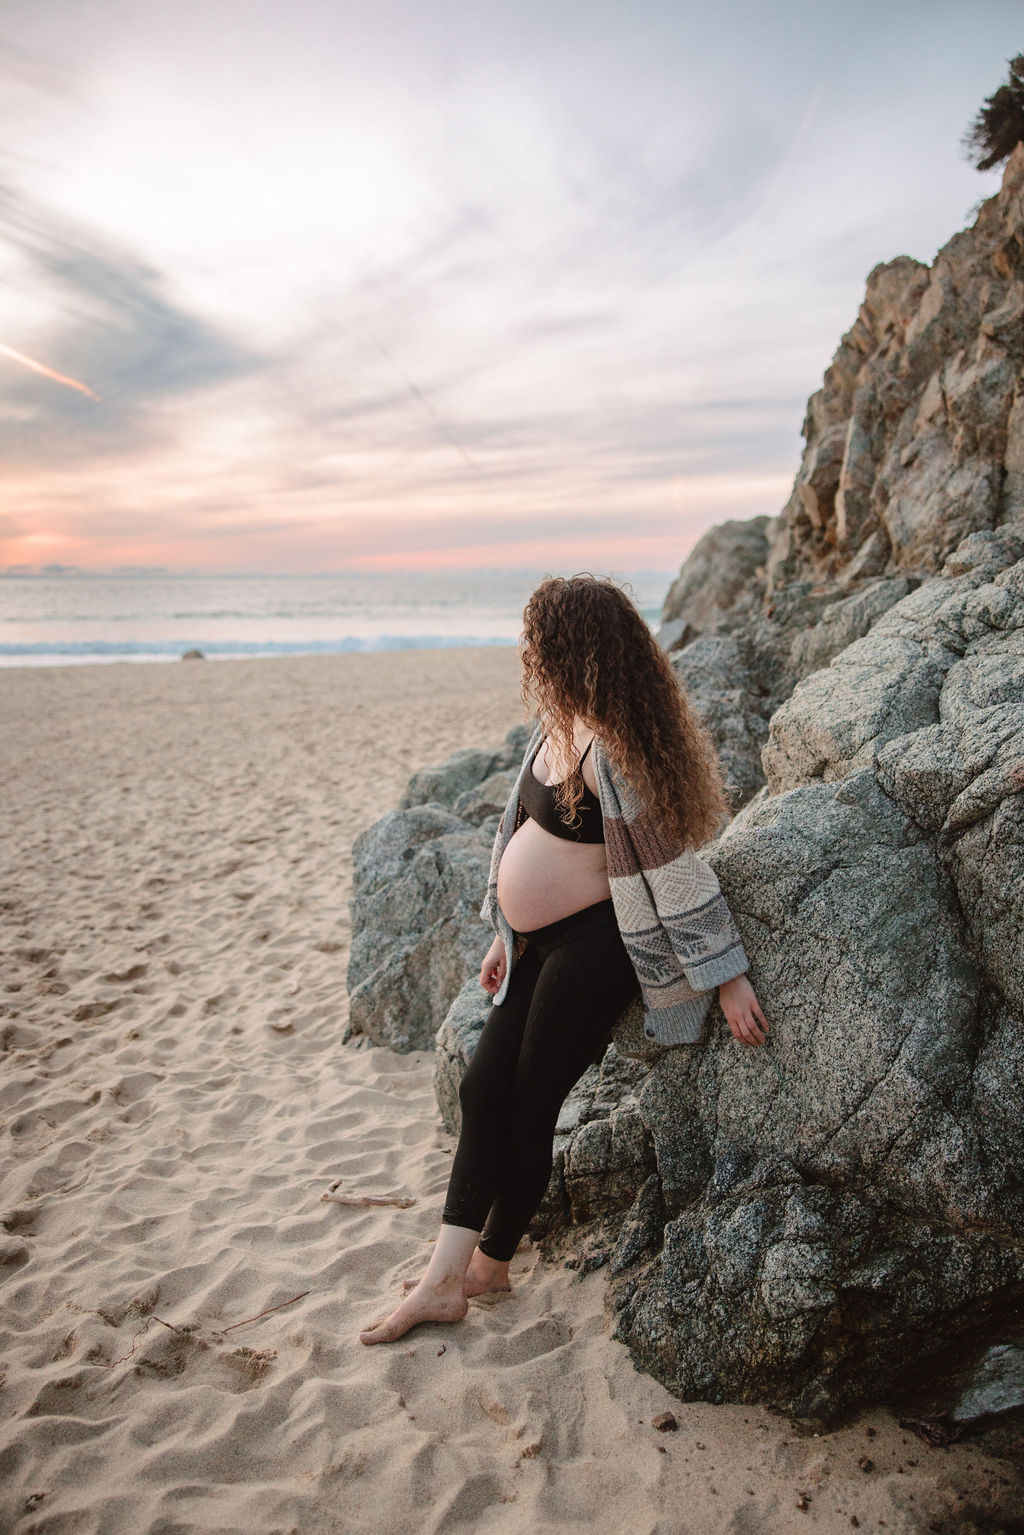 Pregnant woman standing on the beach at sunset, cradling her belly.